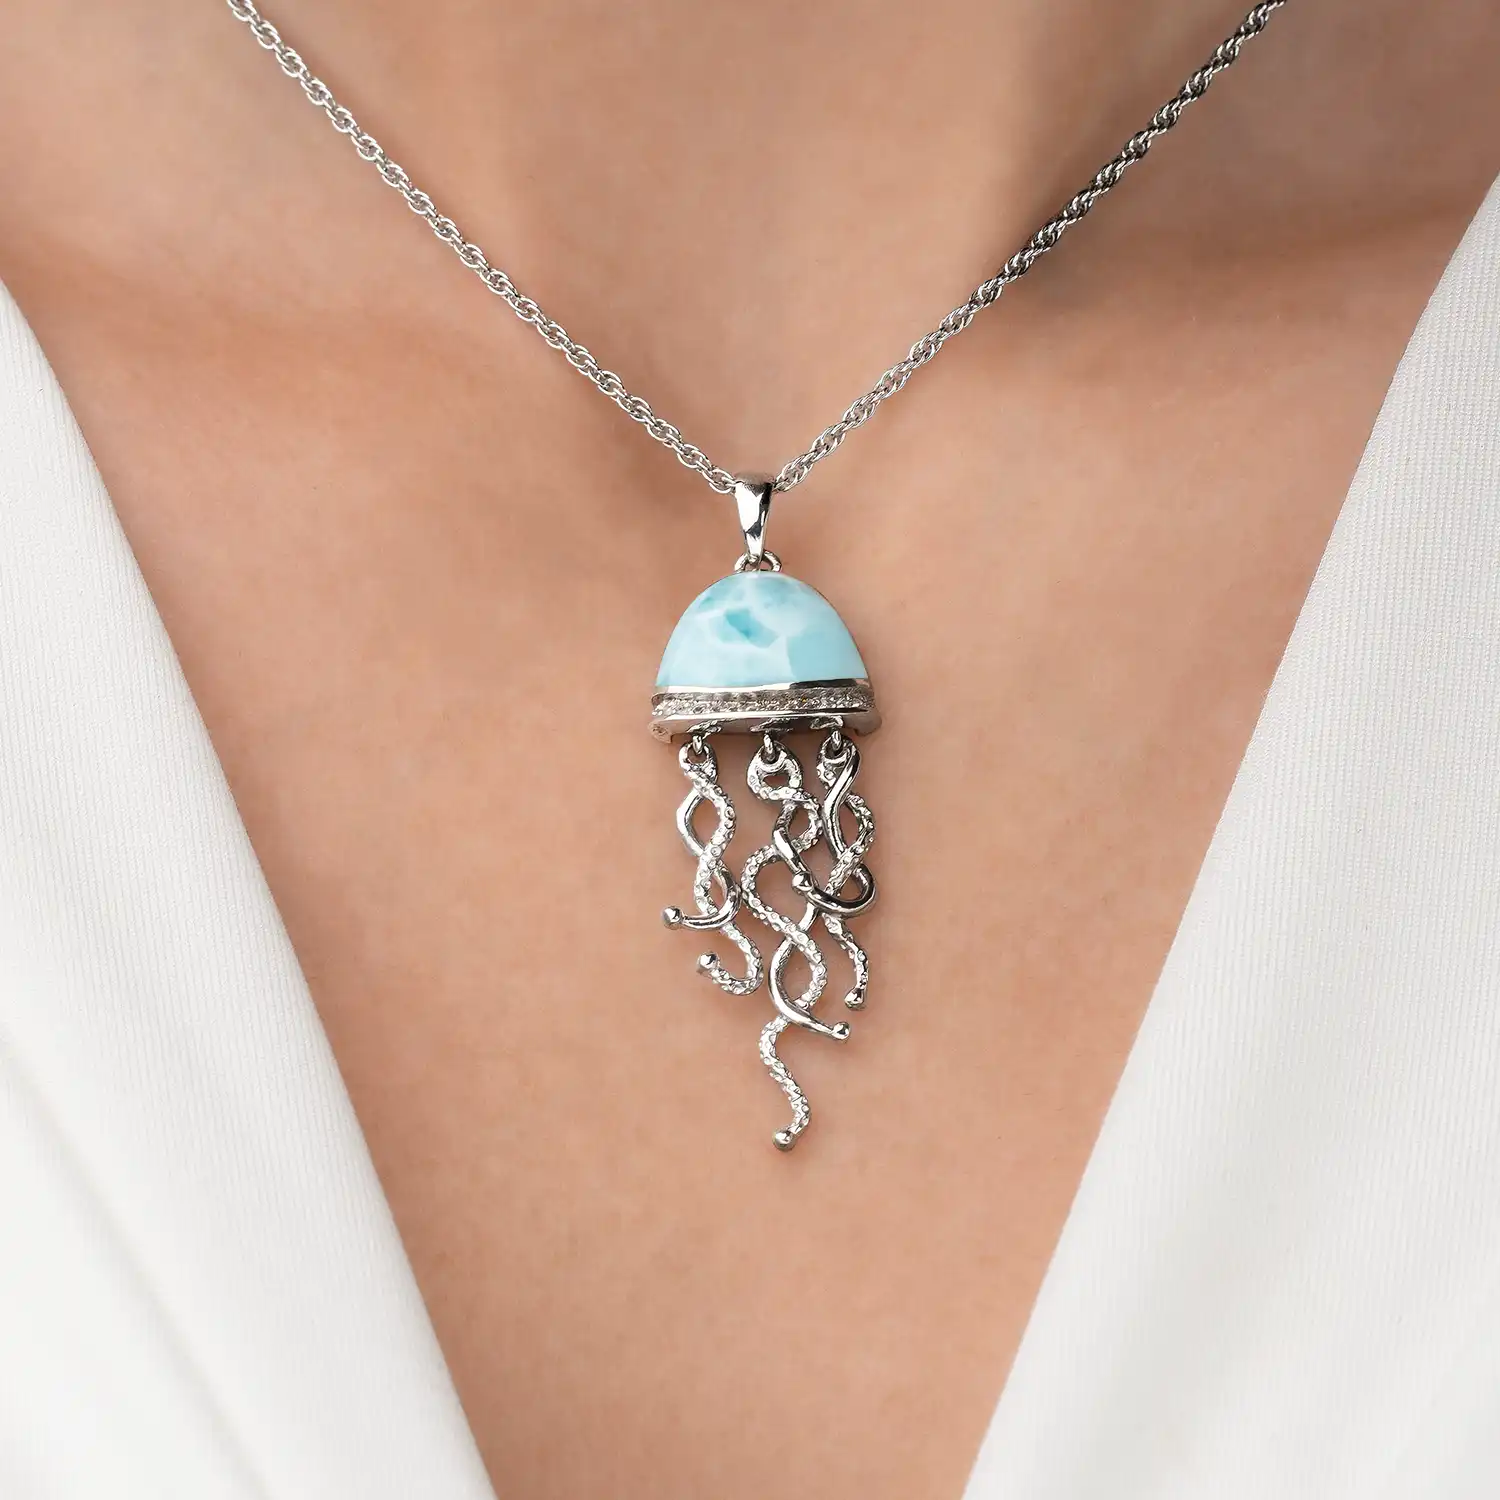 Jellyfish Necklace in sterling silver 